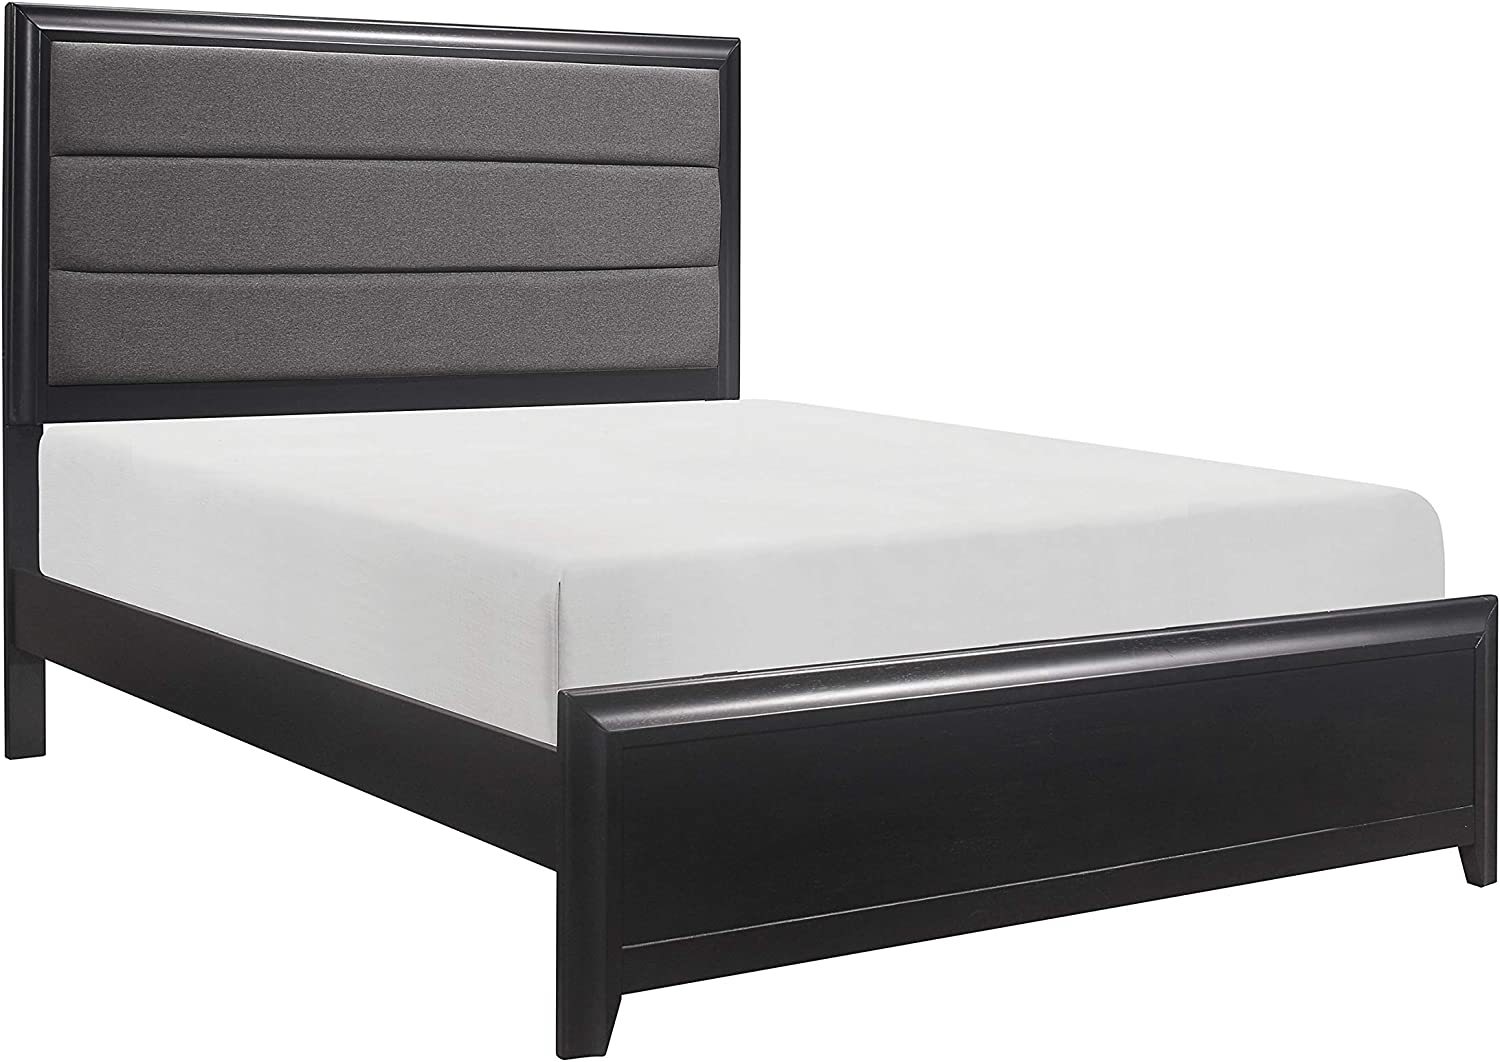 Primary image for King-Size Espresso Lexicon Heath Court Panel Bed.